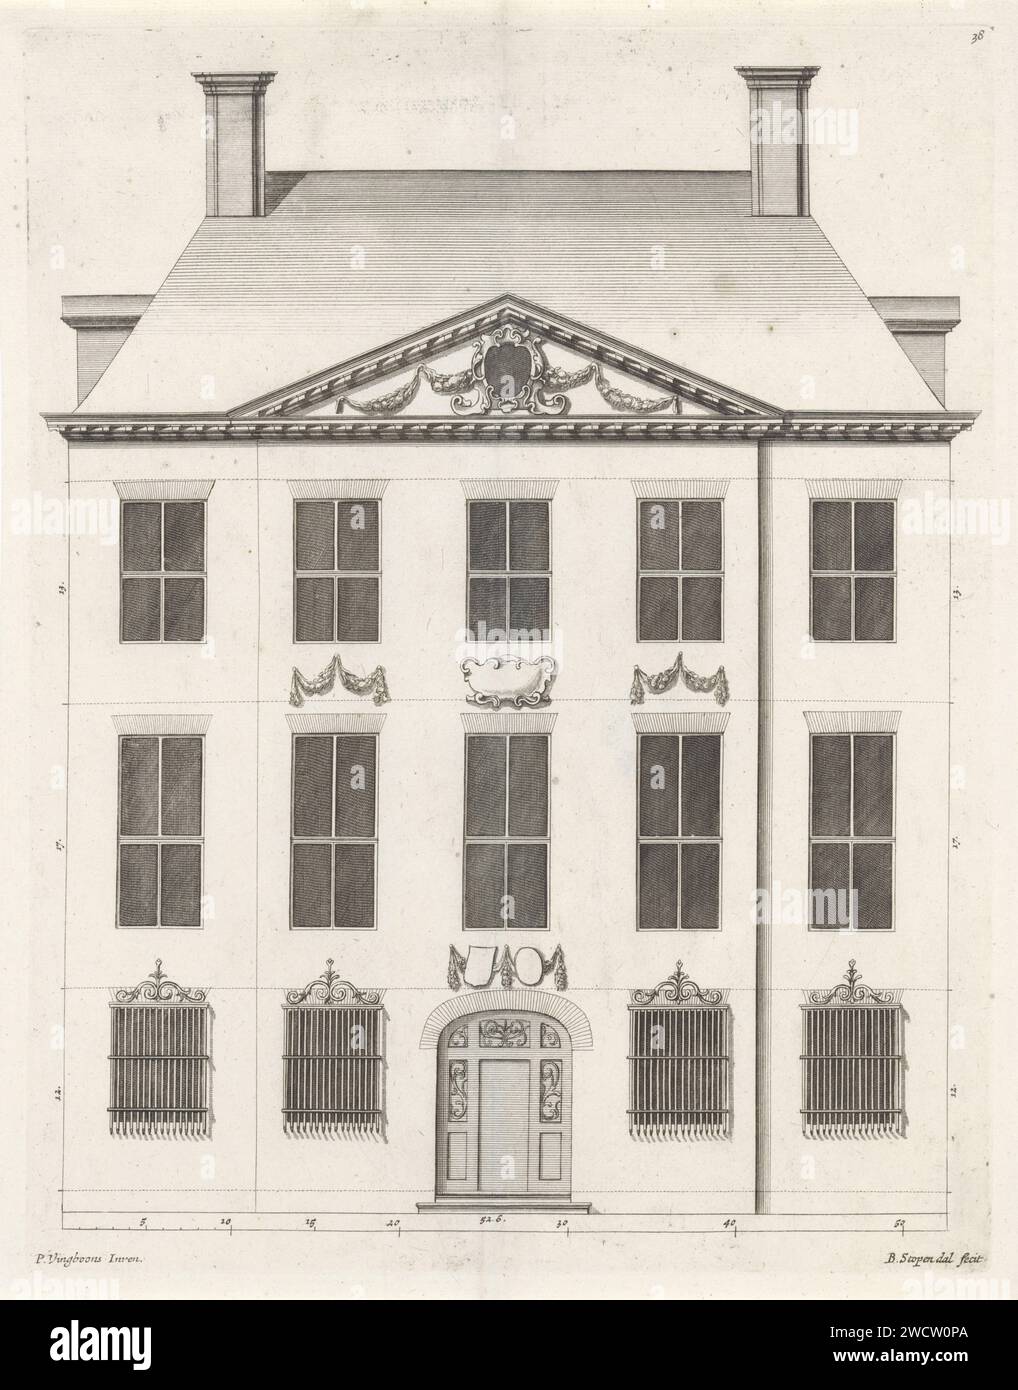 Facade of a house on Keizersgracht in Amsterdam, Bastiaen Stopendael, after Philips VinckBoons (II), 1674 print Facade of a house on Keizersgracht in Amsterdam, built on behalf of Isaak Jan Nijs in 1664-1666. The house was designed by Philips Vingboons. Amsterdam paper etching / engraving exterior  architectural design or model Amsterdam Stock Photo